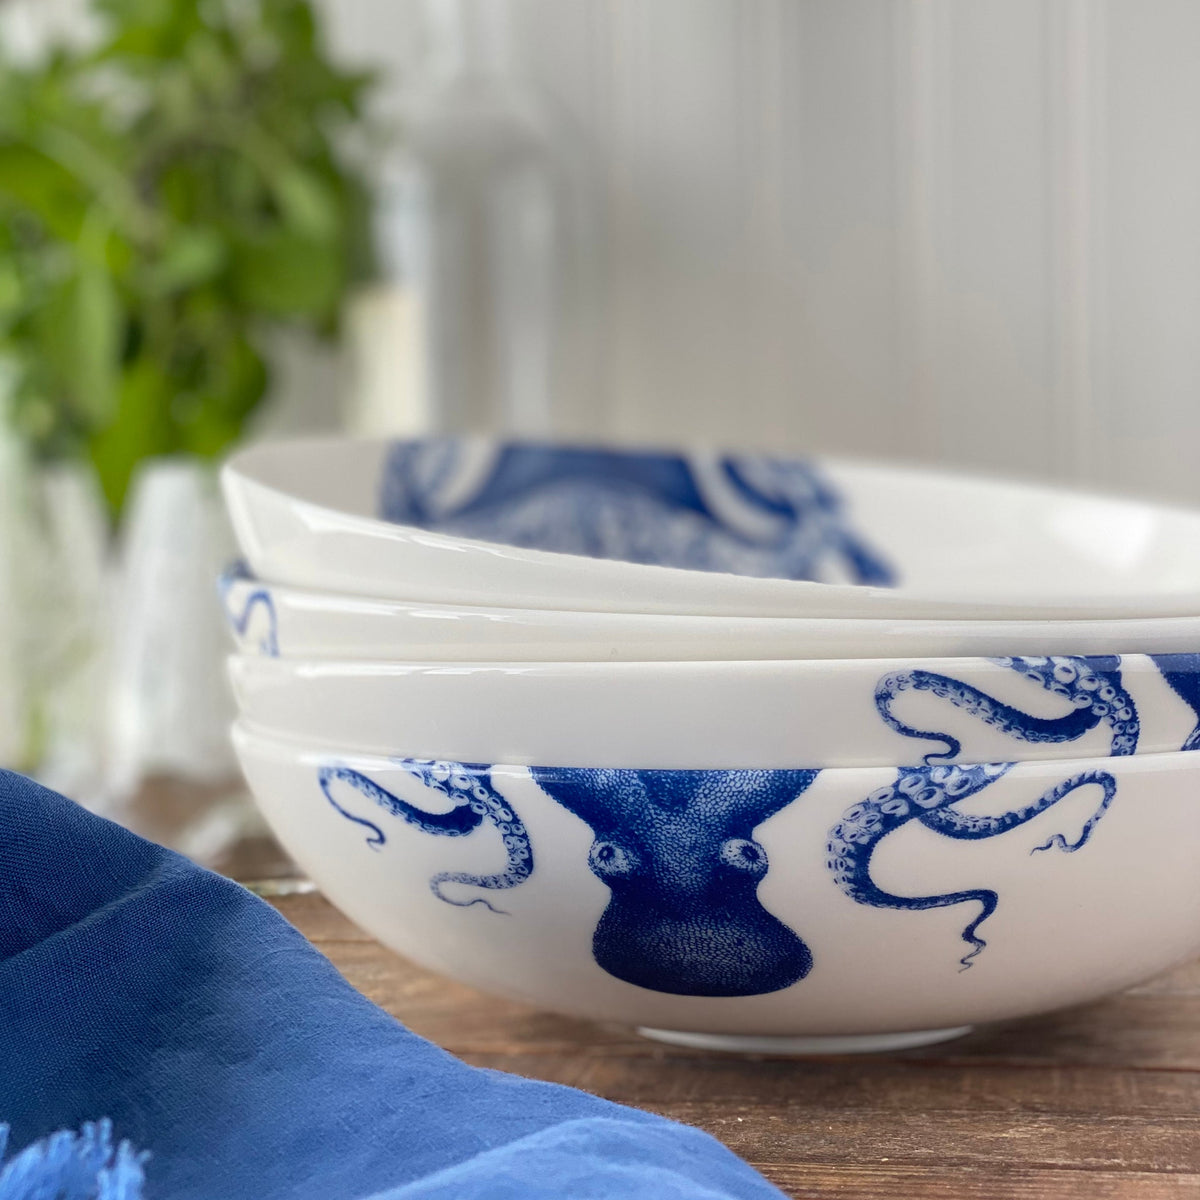 Three Lucy Entrée Bowls by Caskata Artisanal Home with blue designs are stacked on a wooden surface. A blue cloth is partially visible in the foreground, with green leaves and a glass bottle blurred in the background, highlighting the craftsmanship of these premium porcelain pieces.